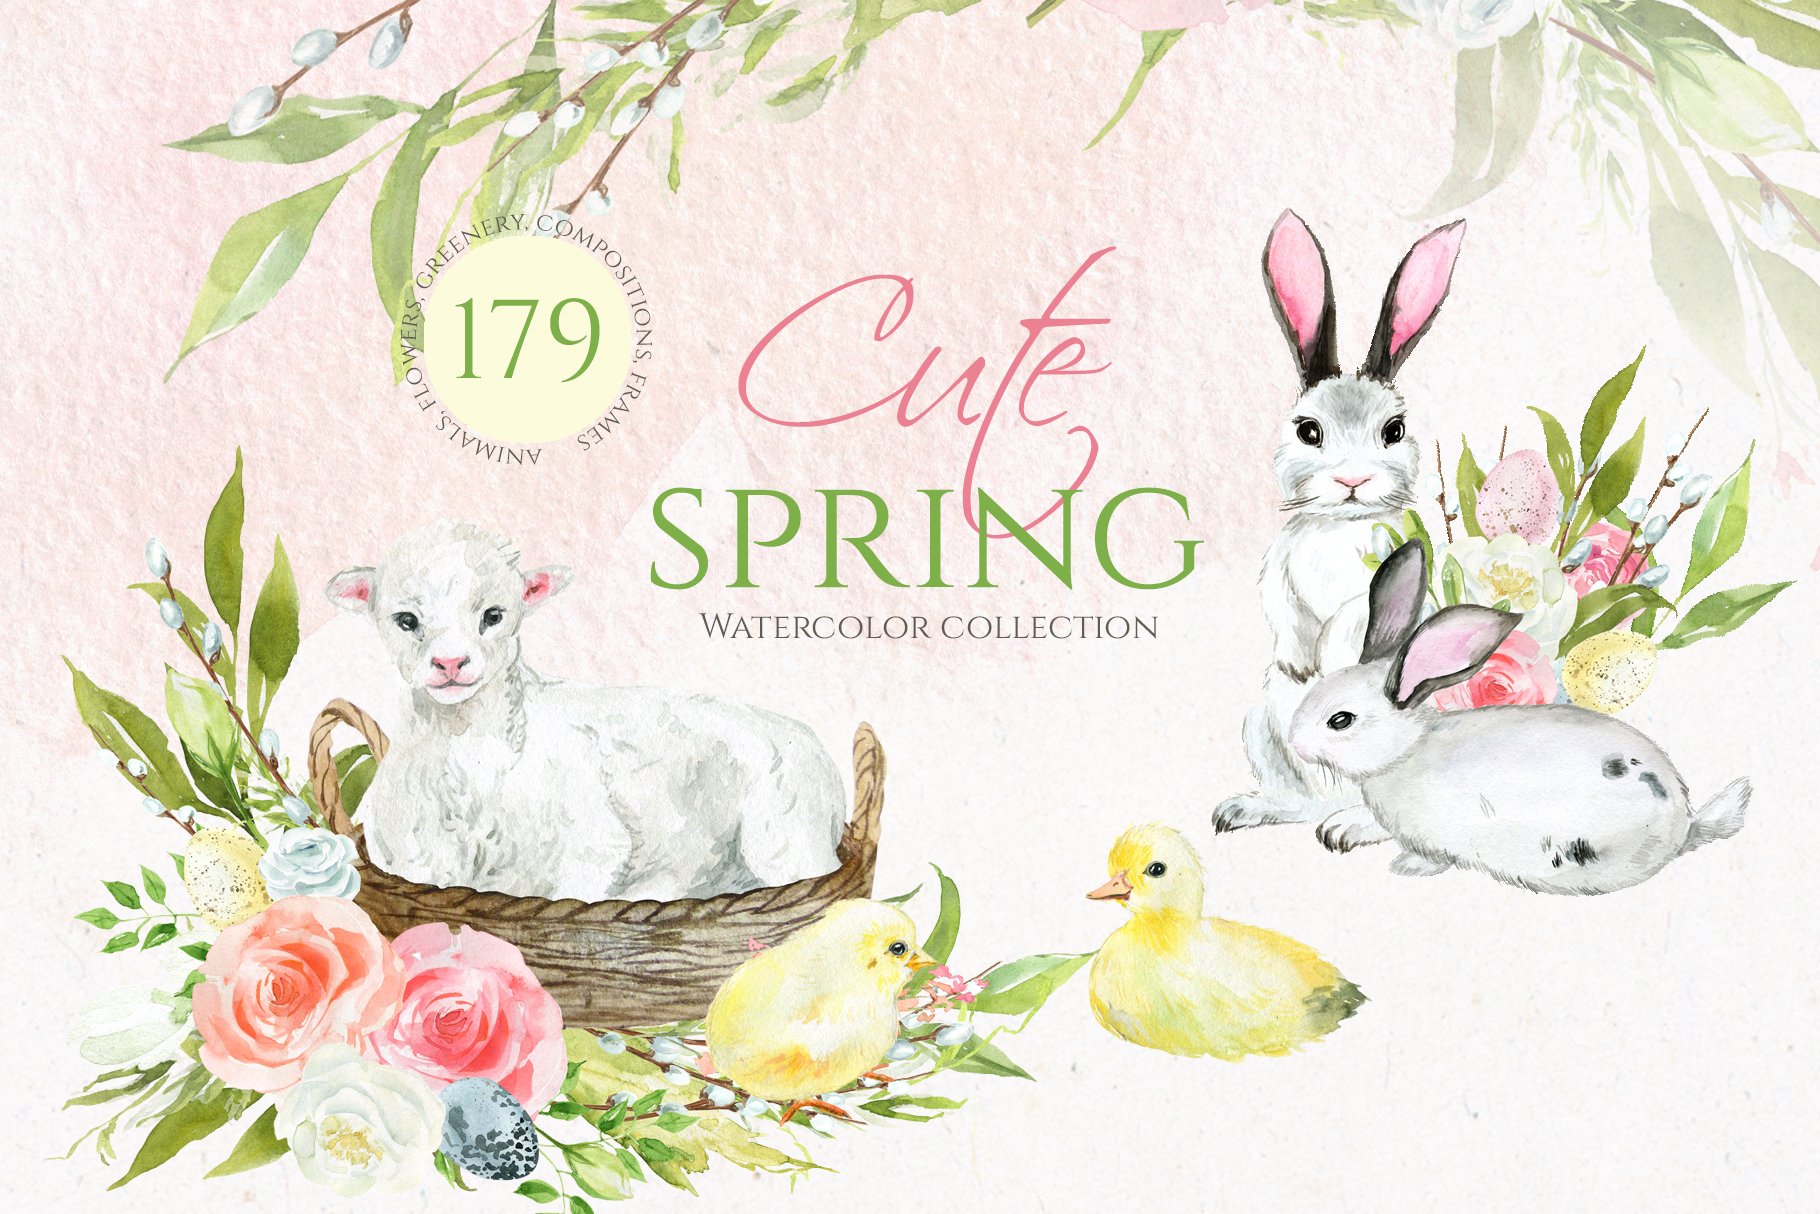 This is a watercolor collection of cute spring cliparts.